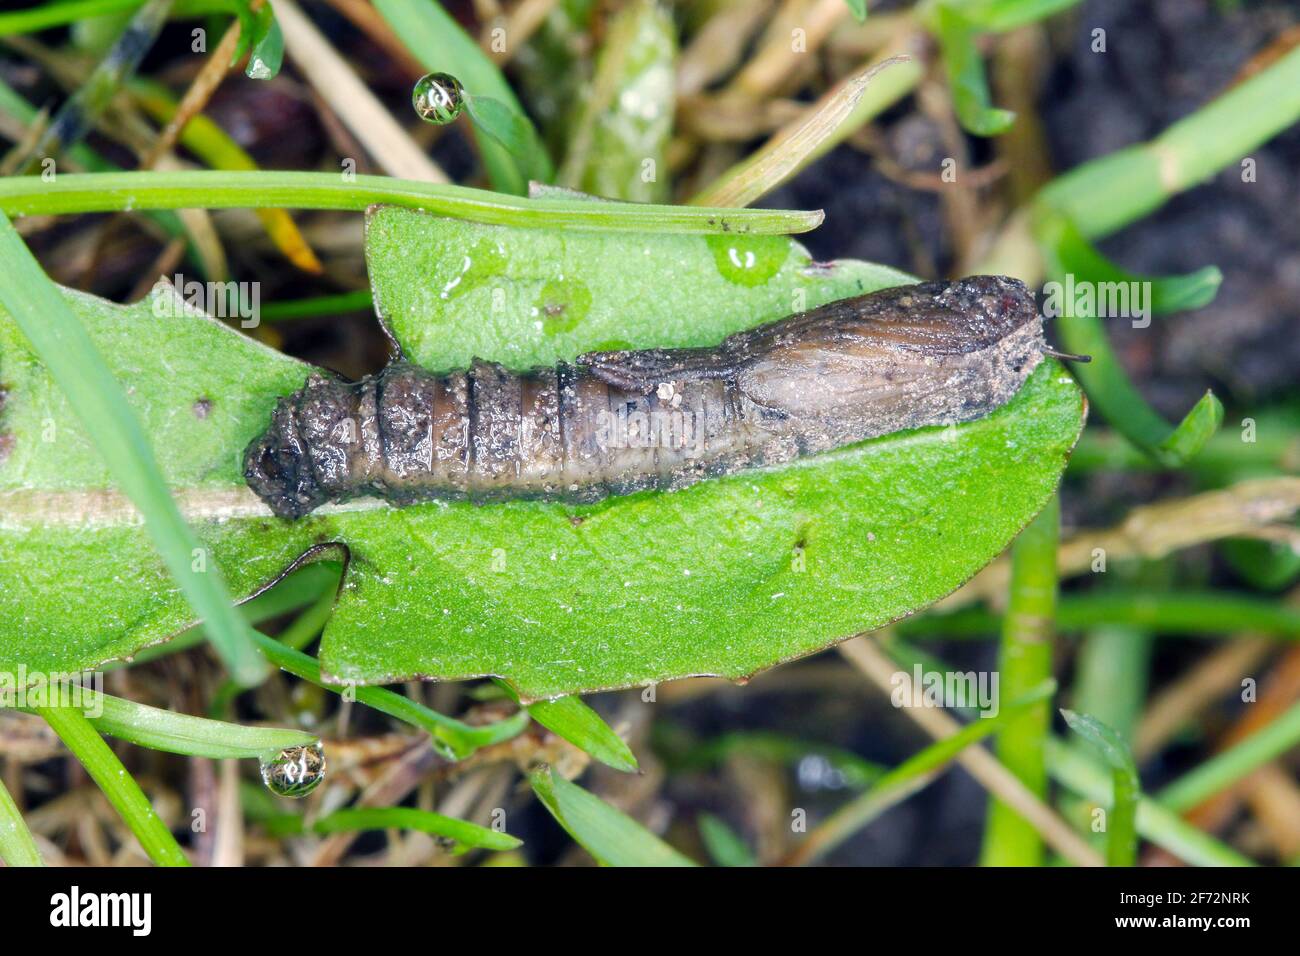 Pupa of Crane fly is a common name referring to any member of the insect family Tipulidae. It is significant pest in soil of many crops. Stock Photo